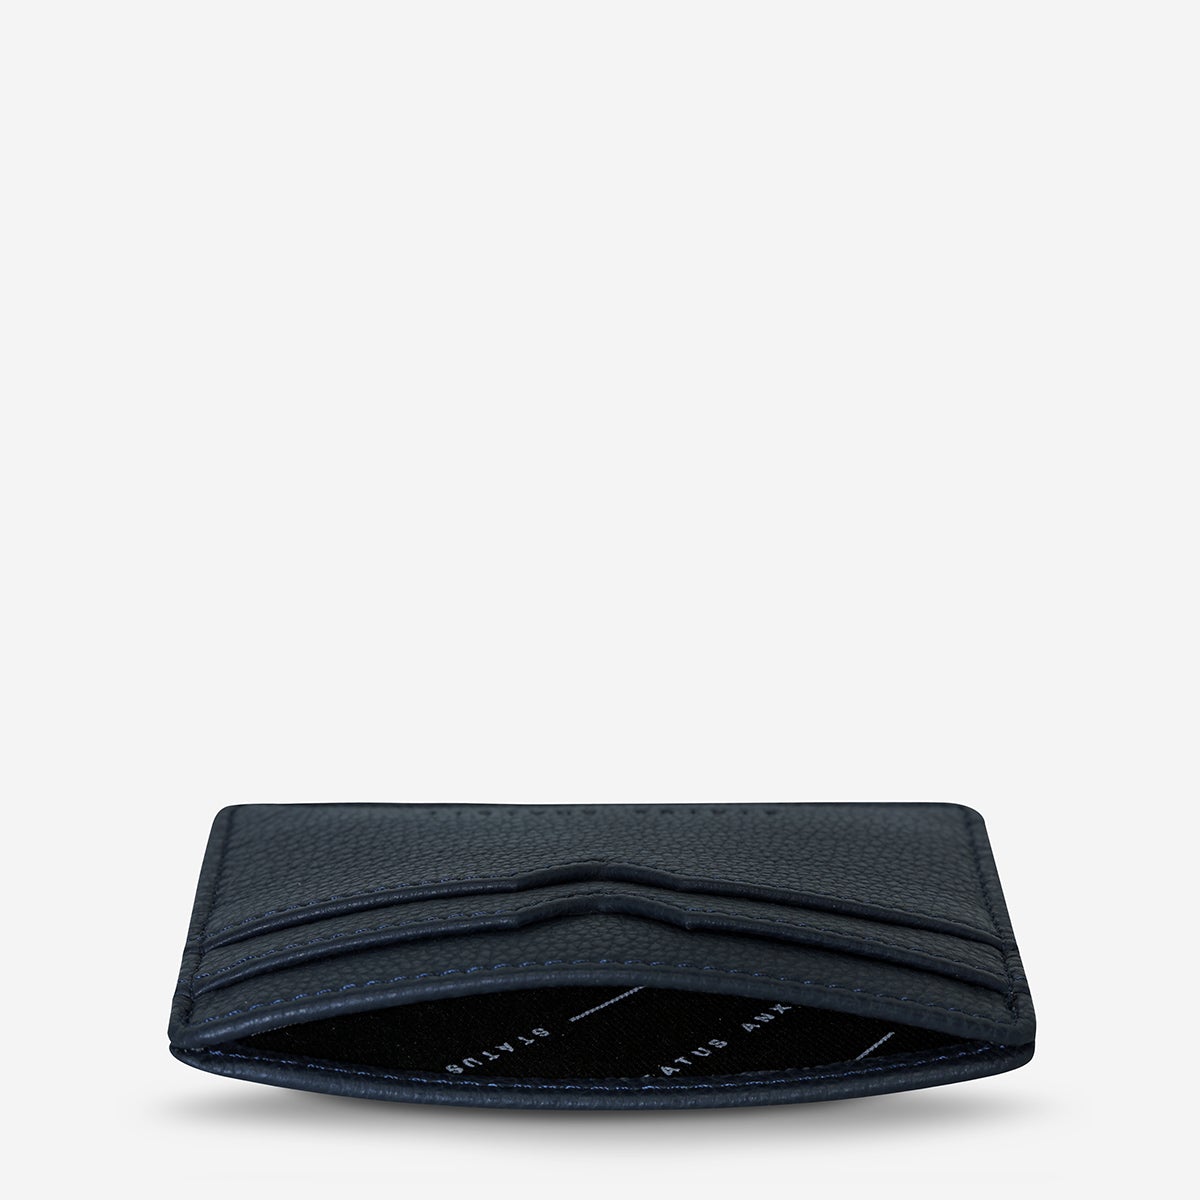 TOGETHER FOR NOW WALLET (Navy)